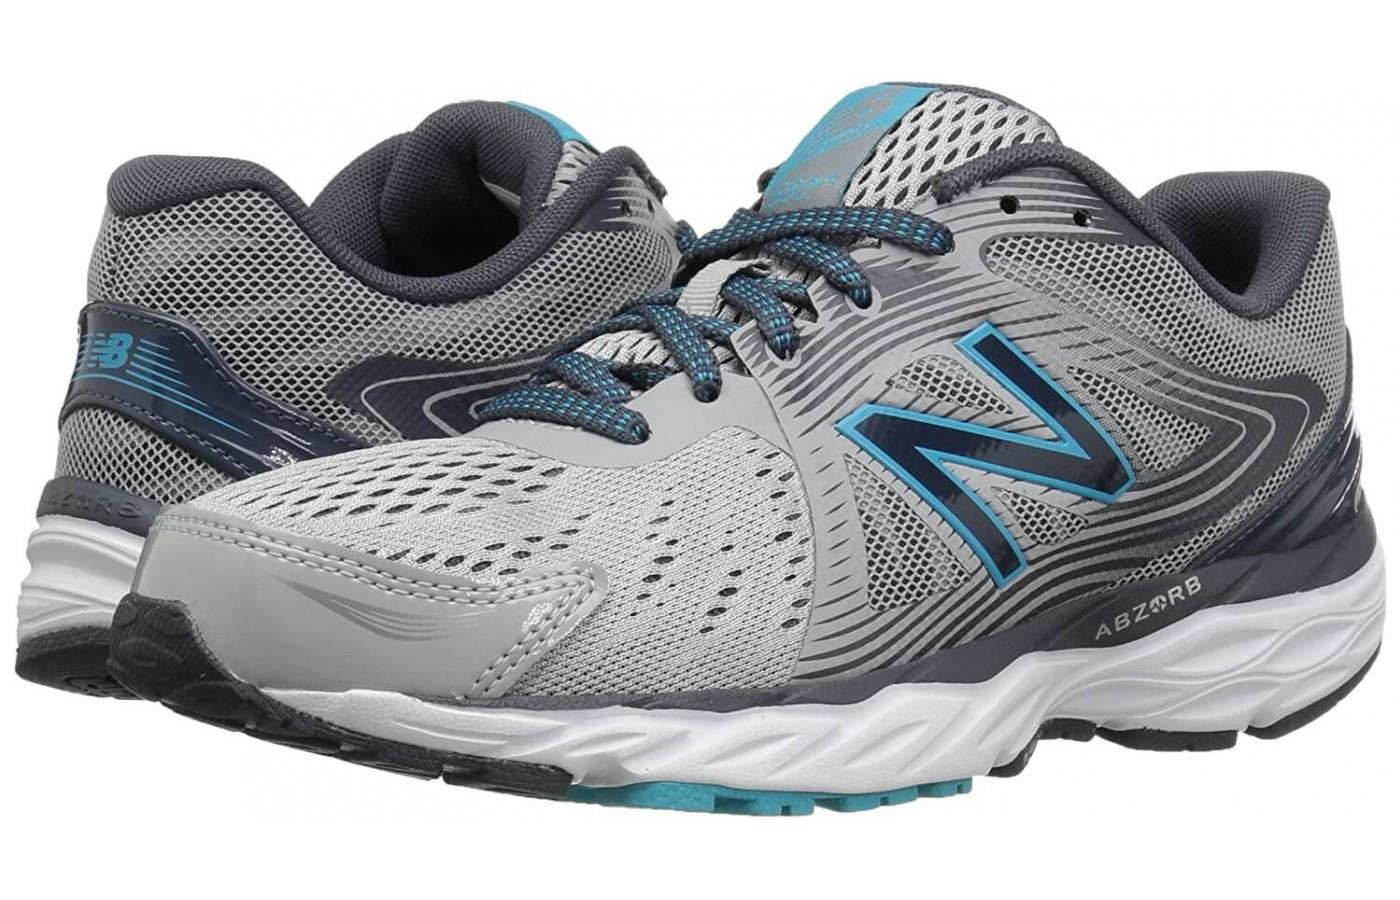 The New Balance 680V4 features a 12mm drop